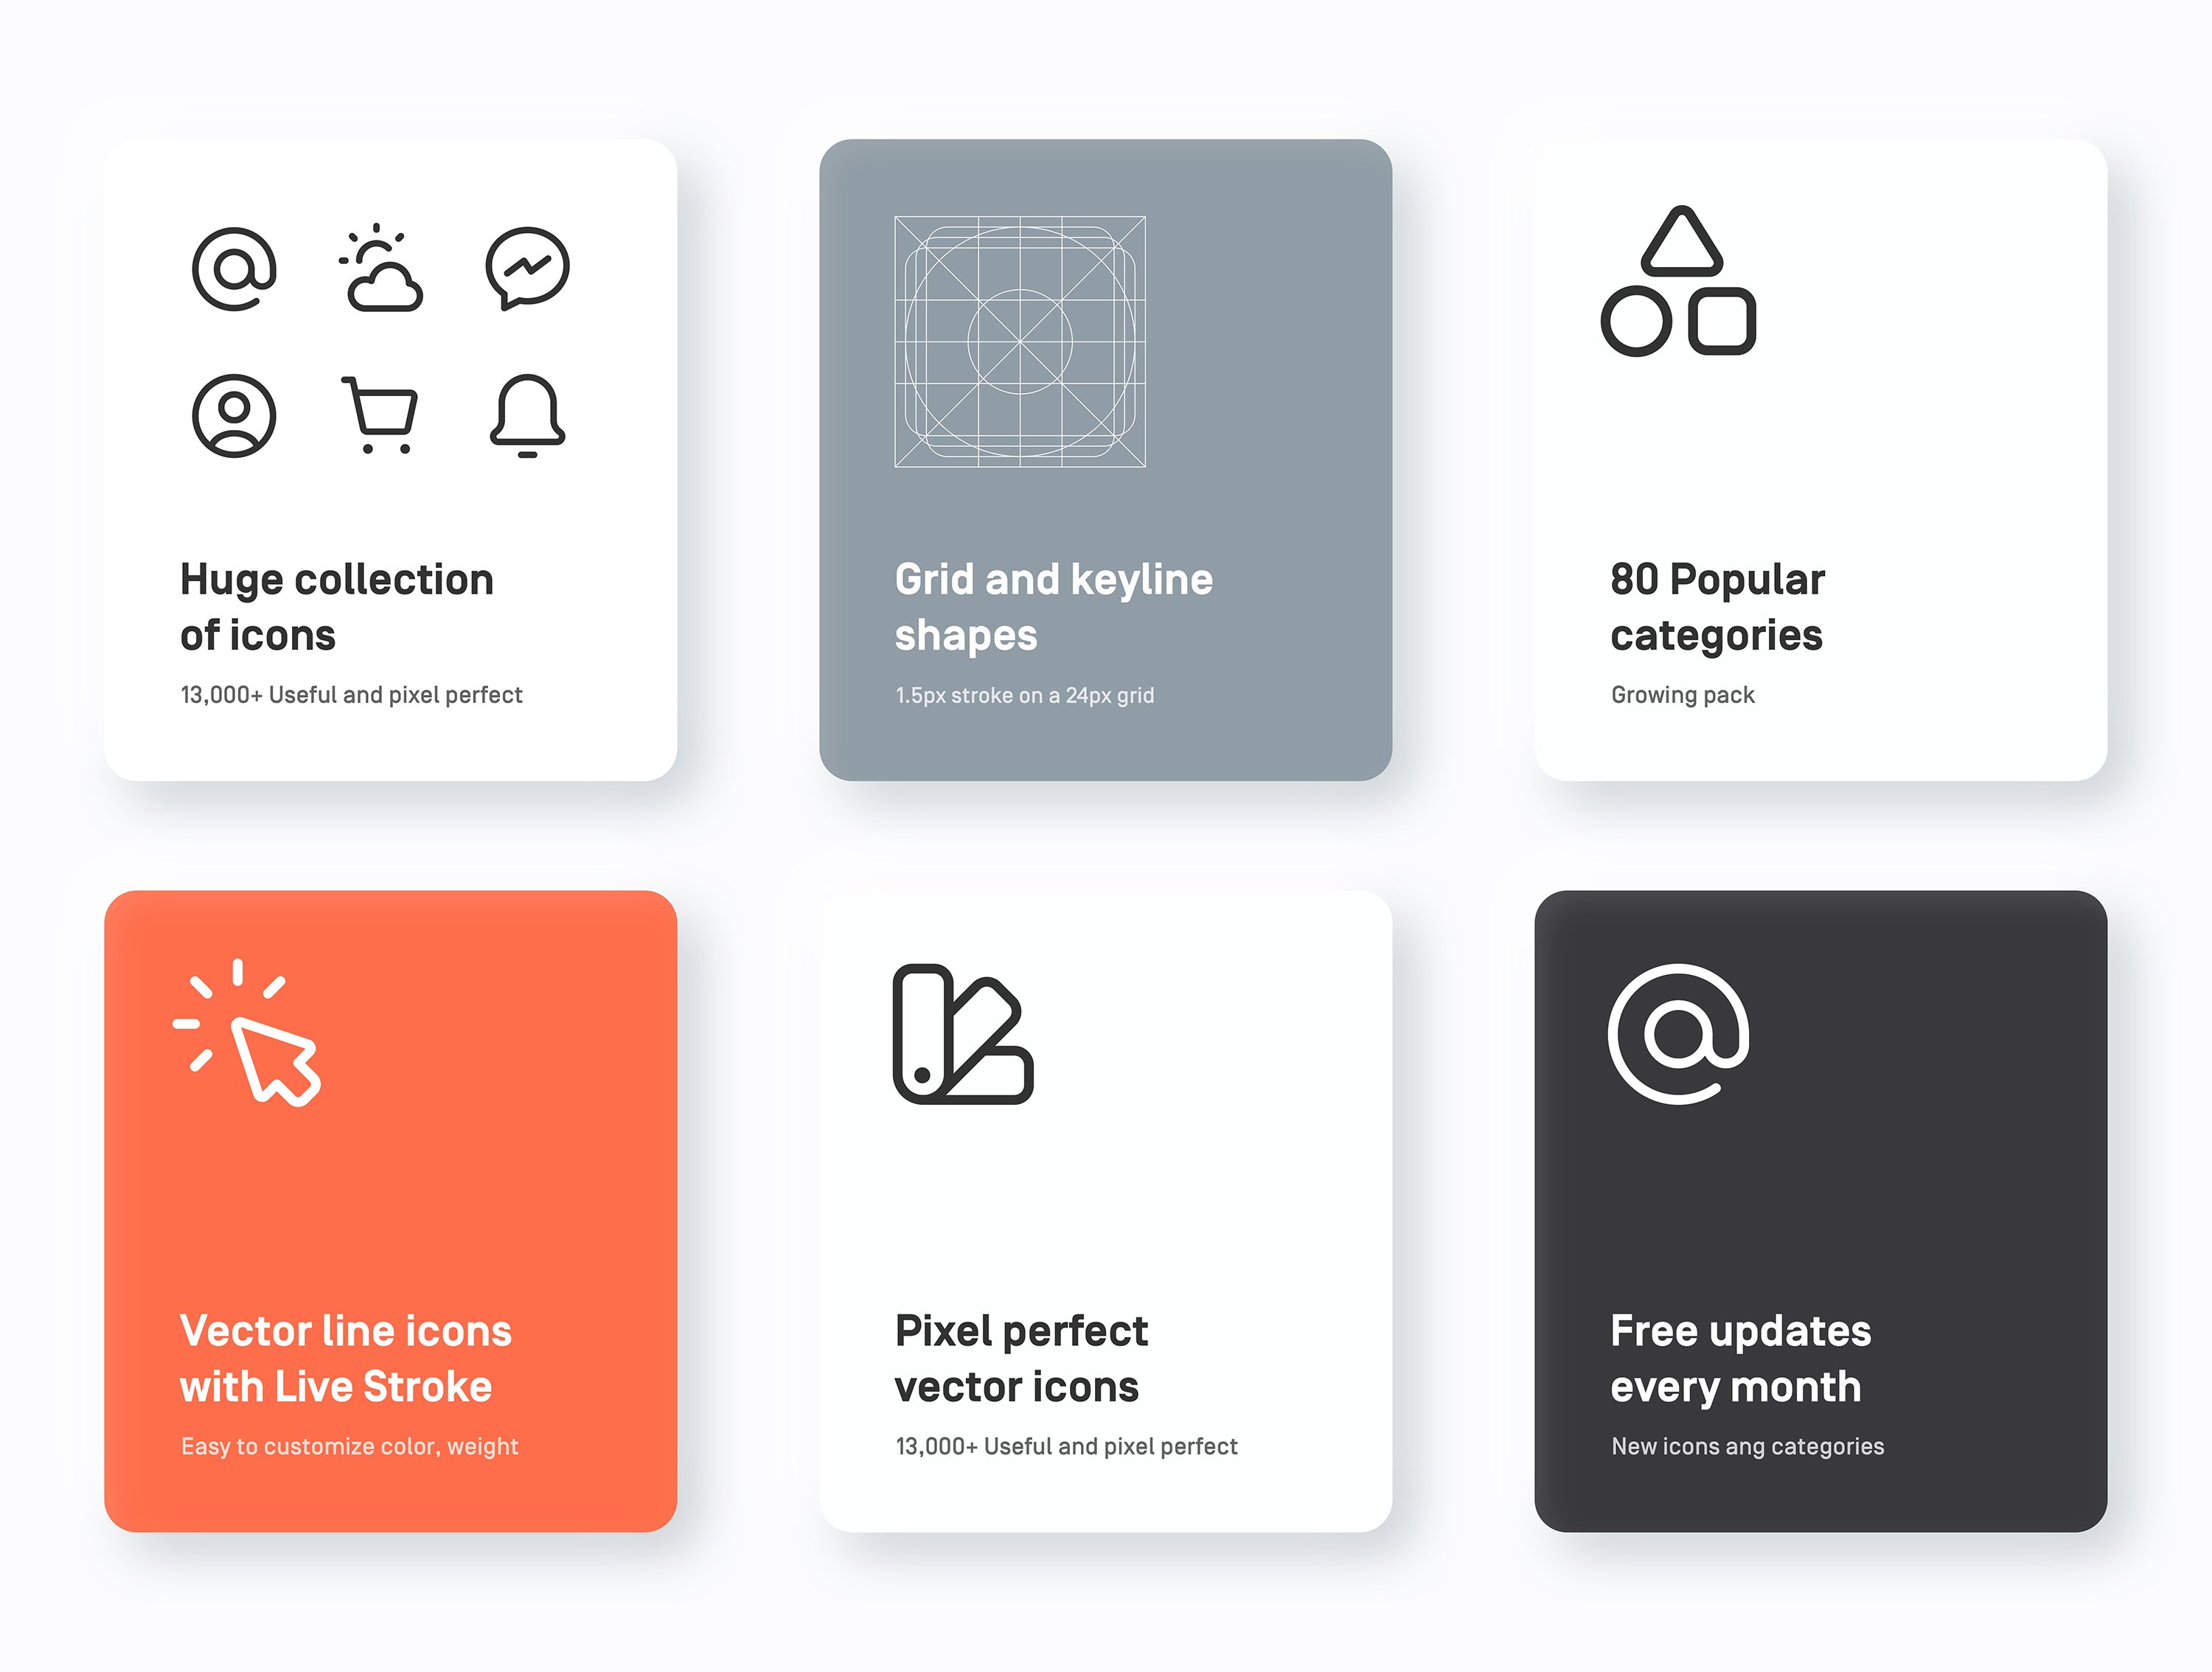 Some features of icons set.